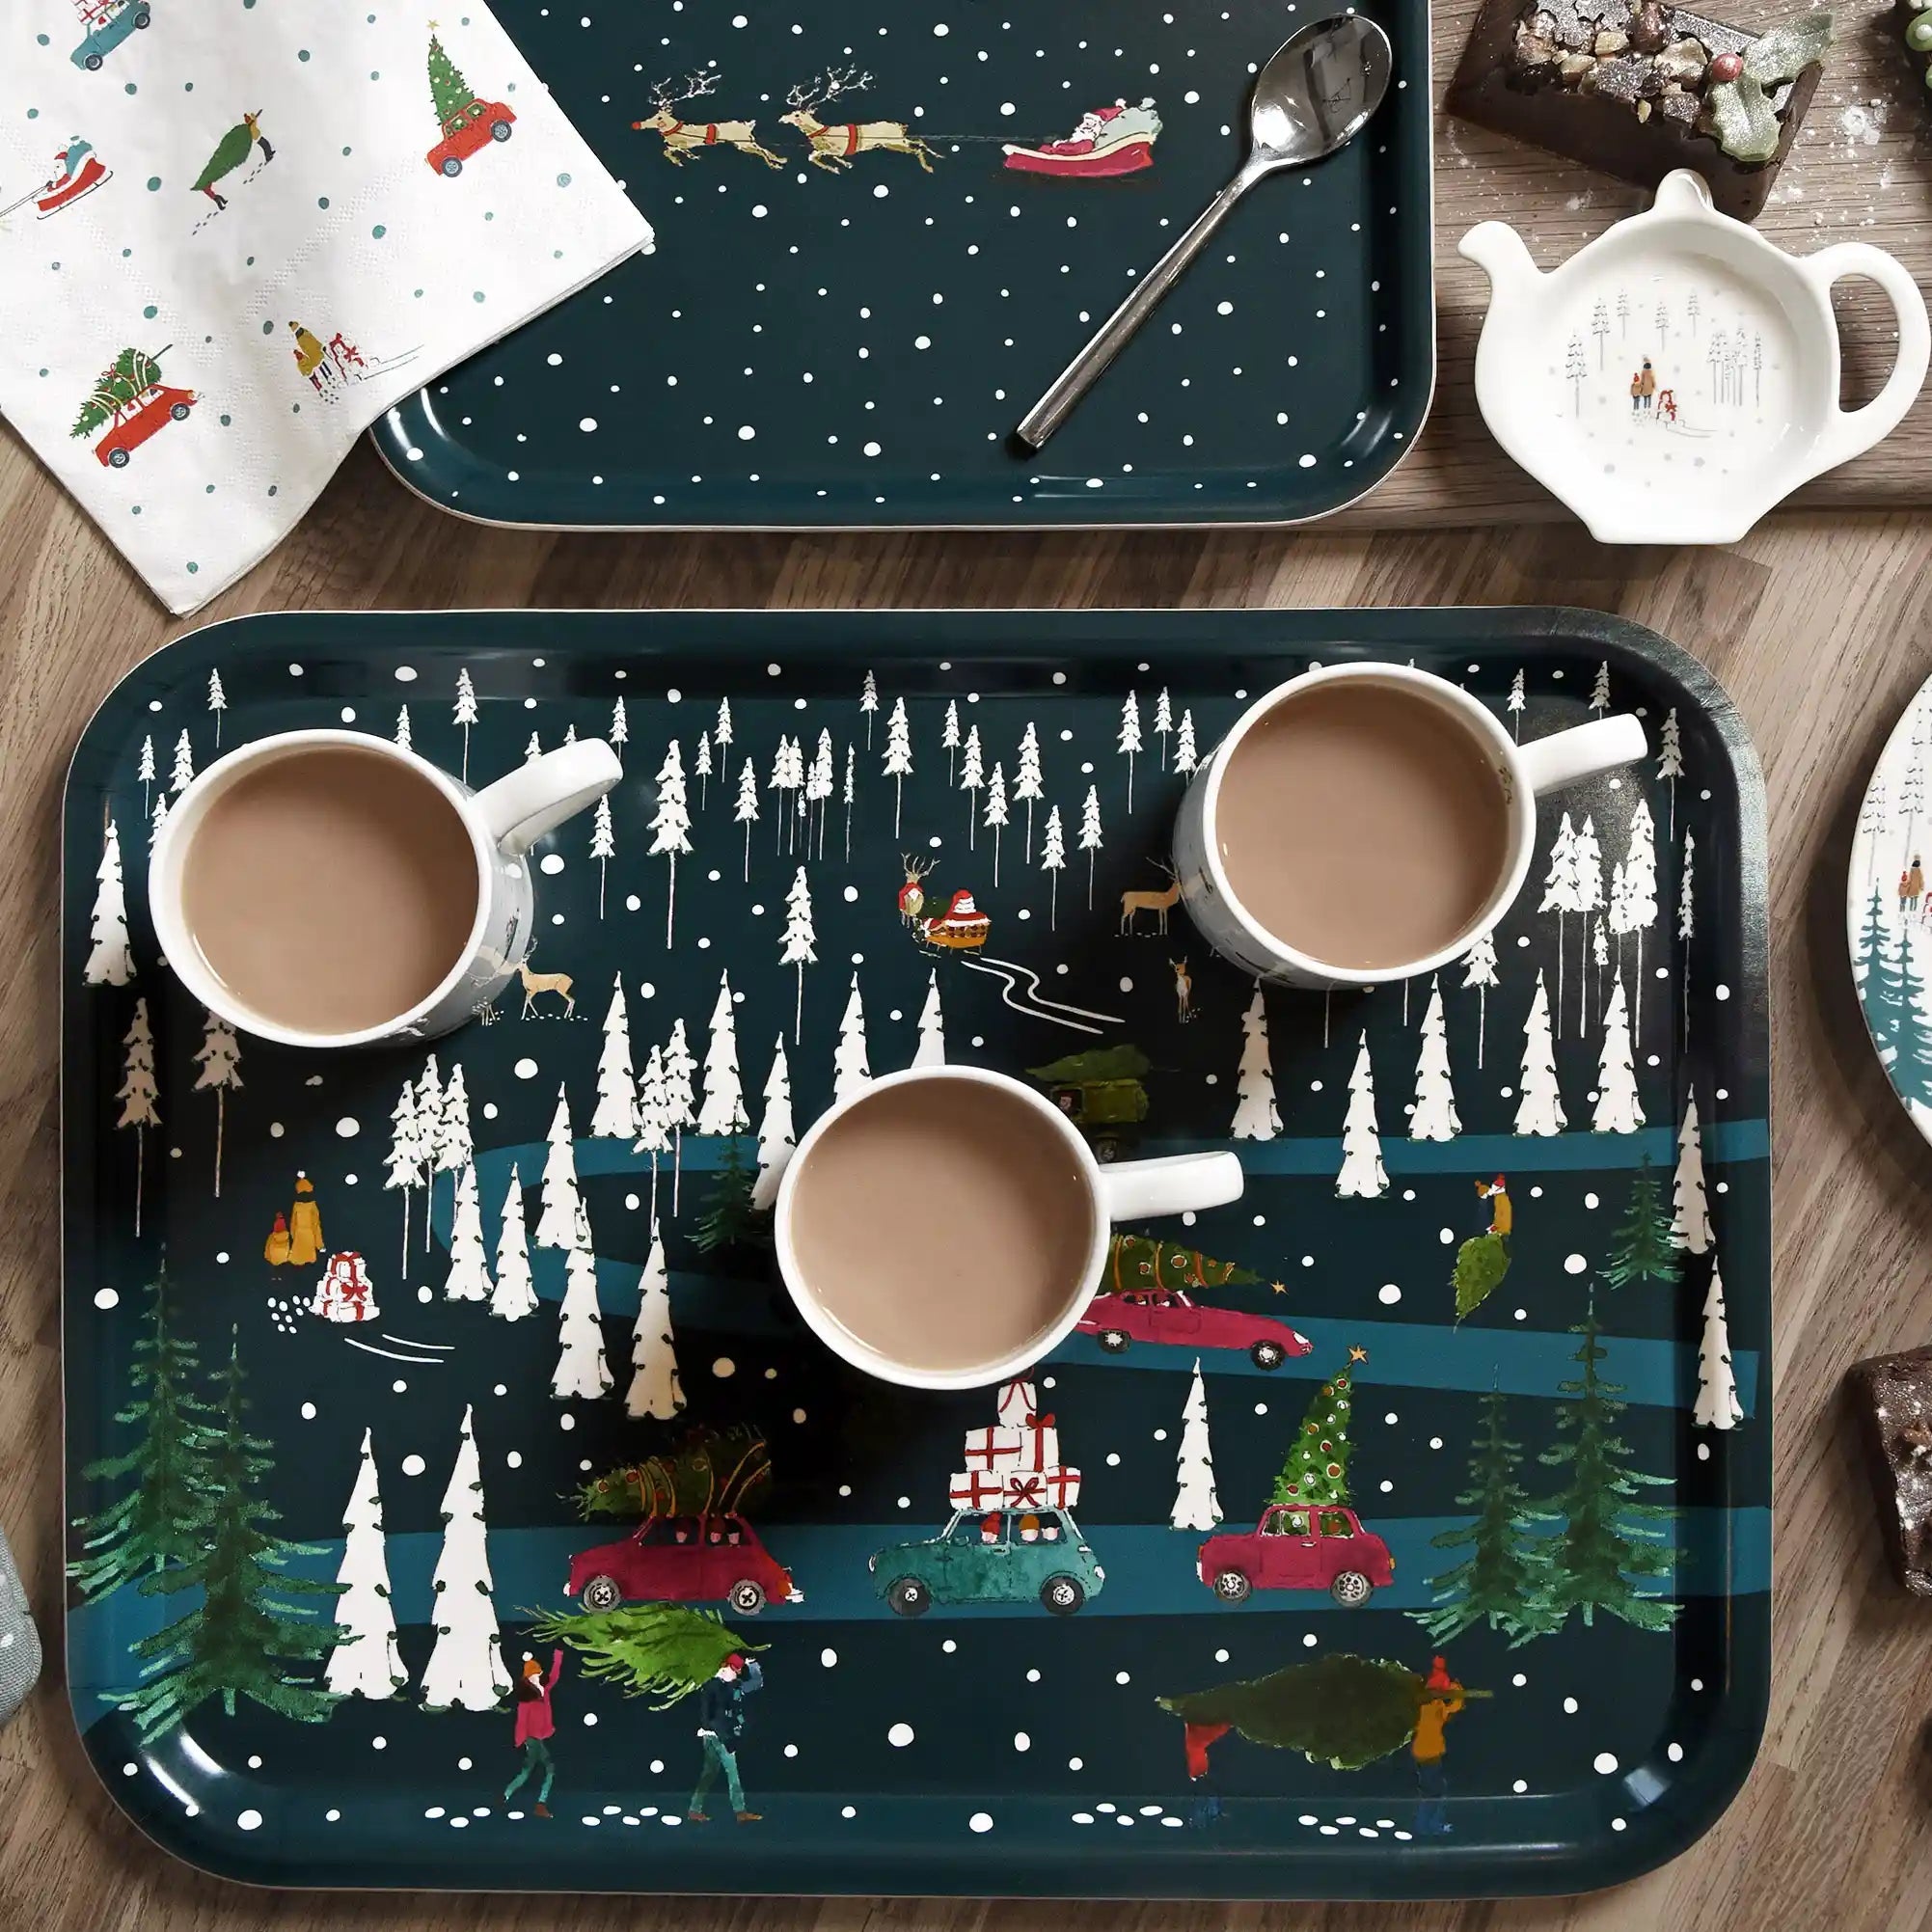 Home for Christmas Serving Tray - Large